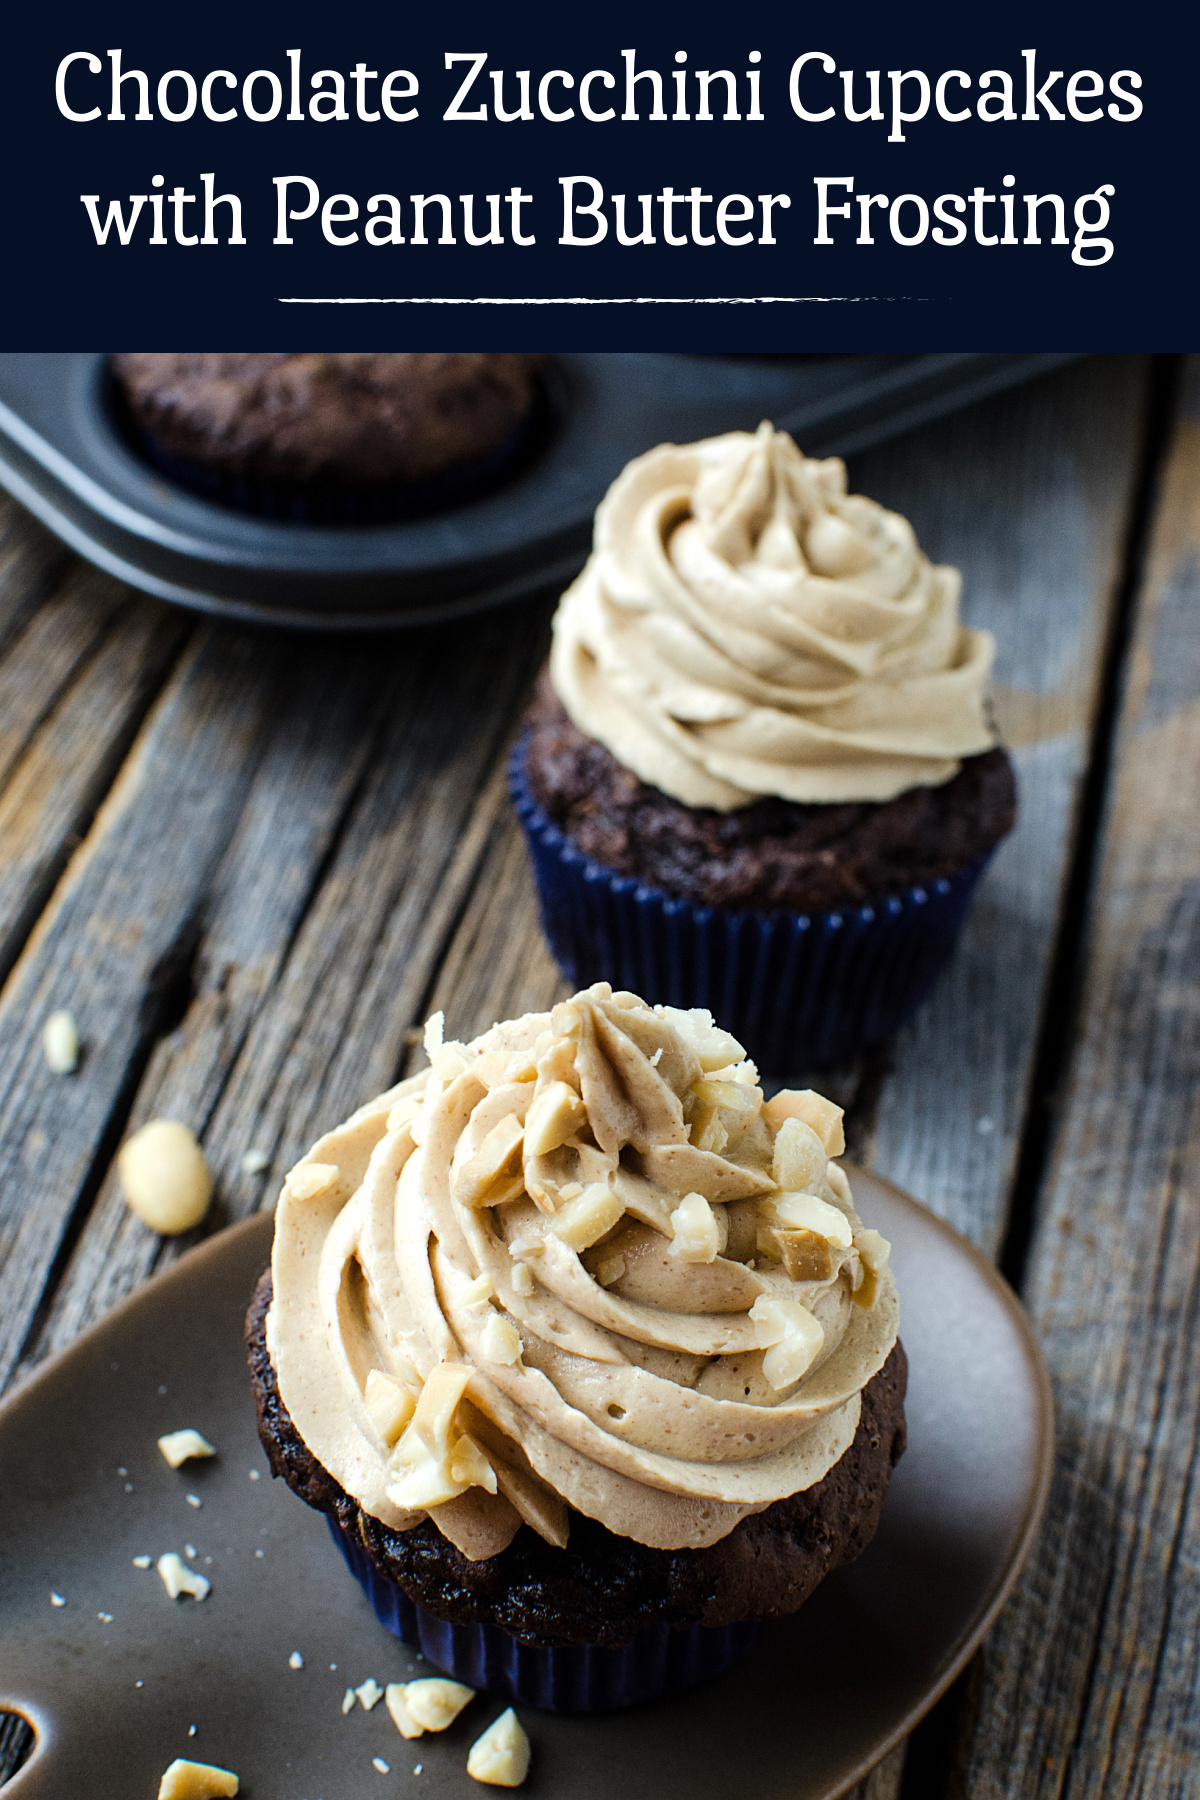 Chocolate Zucchini Cupcakes with Peanut Butter Frosting